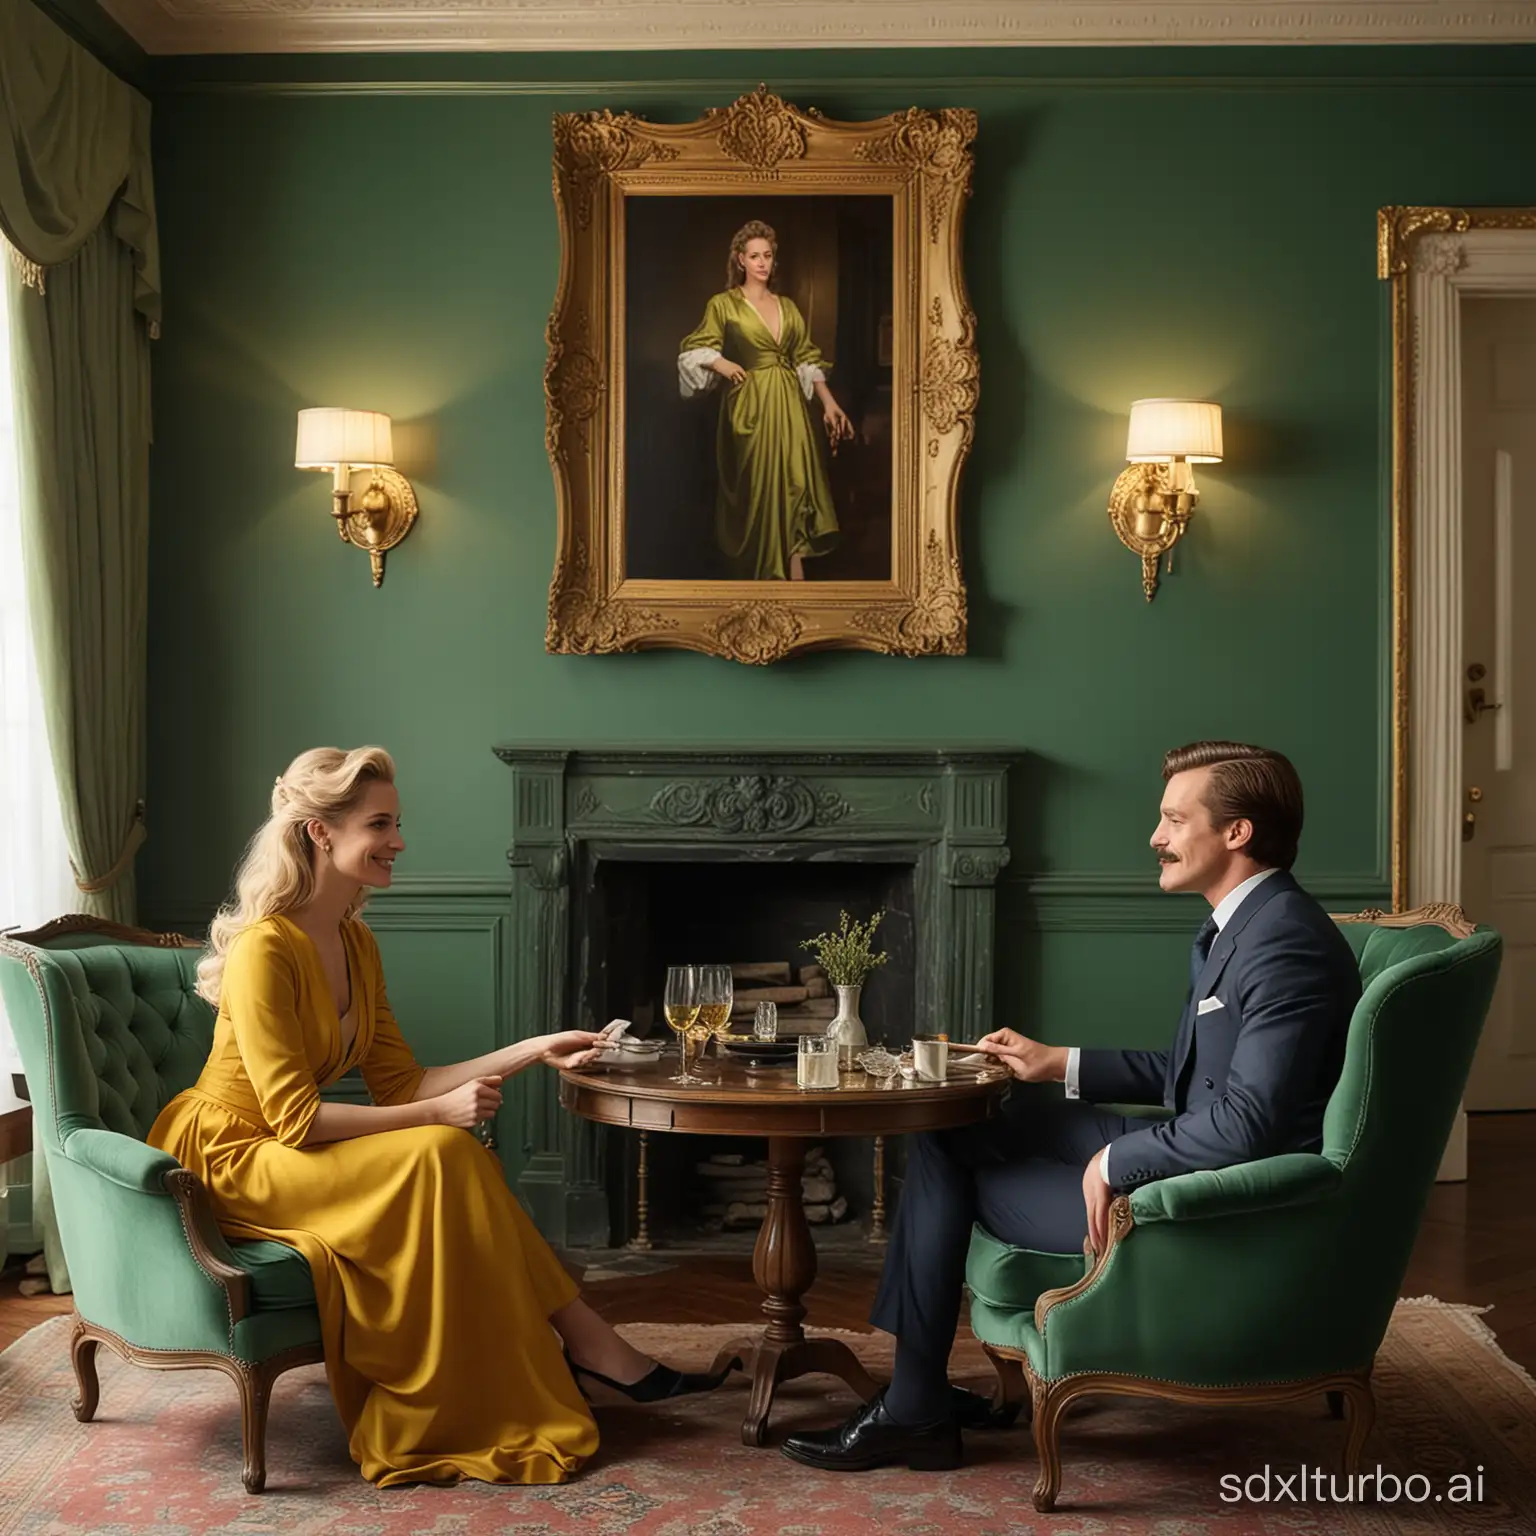 Sophisticated-Vintage-Living-Room-Conversation-with-Elegant-Couple